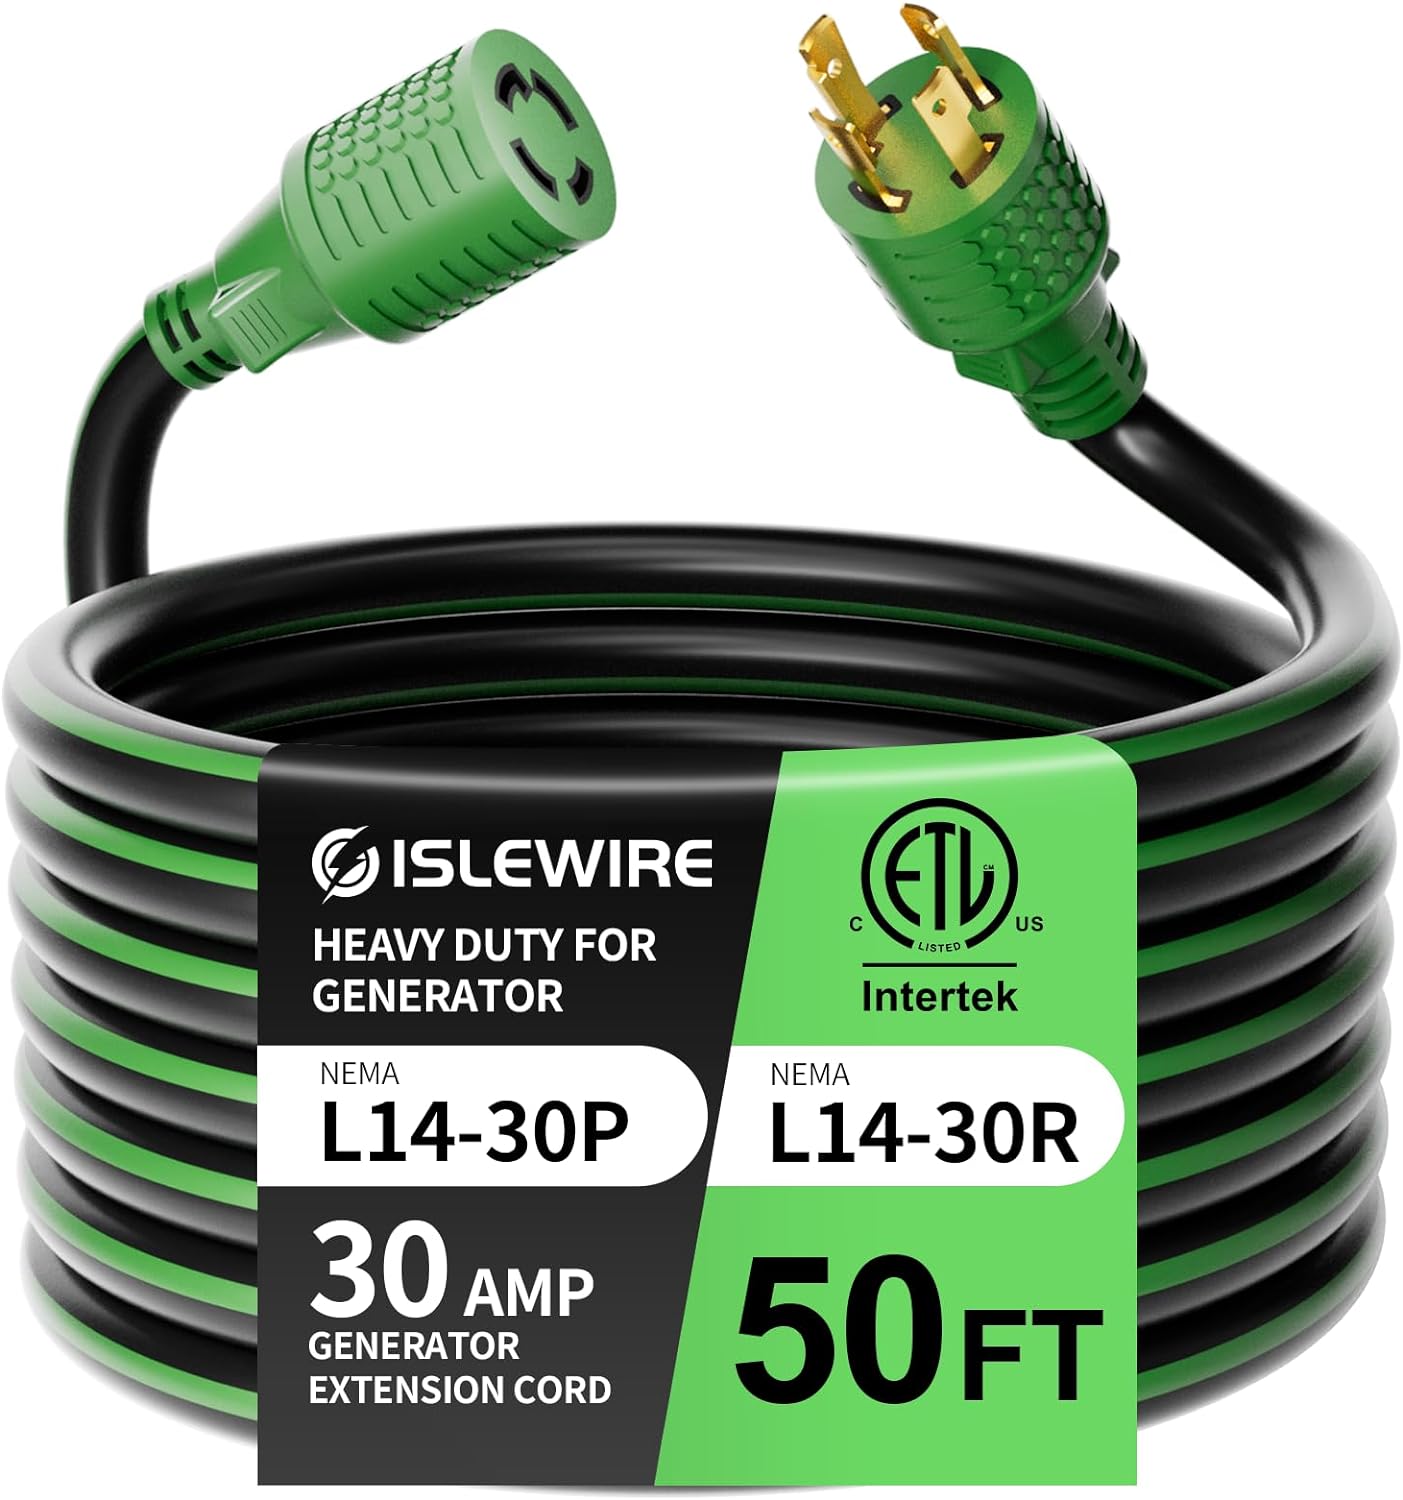 ISLEWIRE 4 Prong 30 Amp Extension Generator Cord 50FT Review